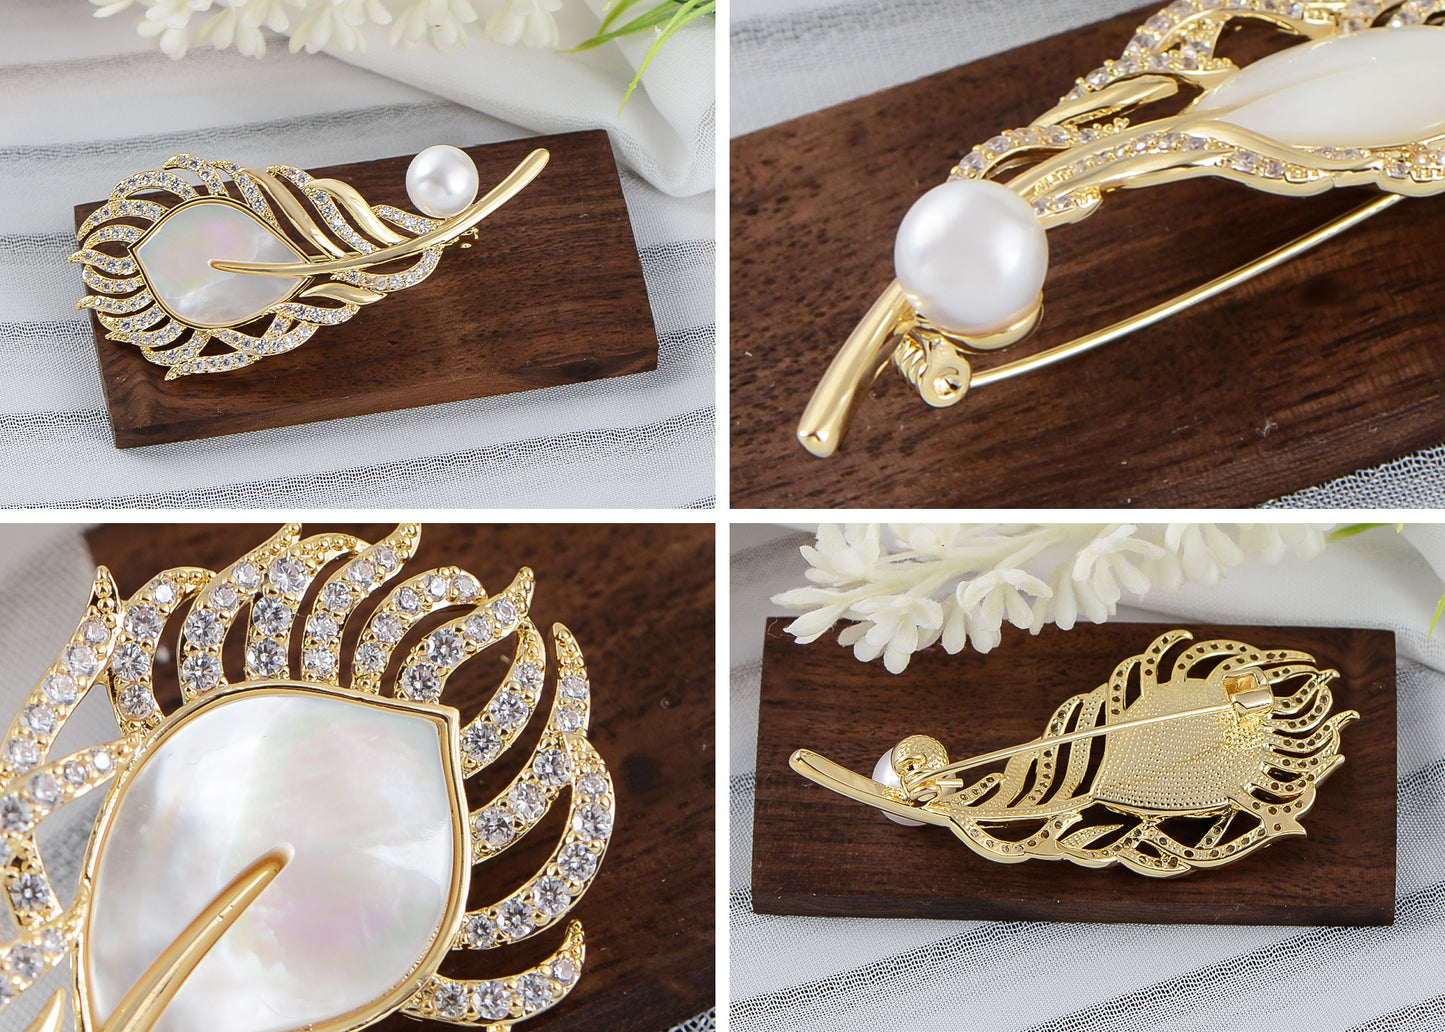 Alilang Shell Pearl Feather Brooch Pin For Women Men Fashion Crystal Rhinestone Delicate Leaf Brooch Lapel Pins Elegant Dress Accessories Jewelry Corsage For Hat Bag Suit Tie Gift Mother'S Day Wedding Birthday